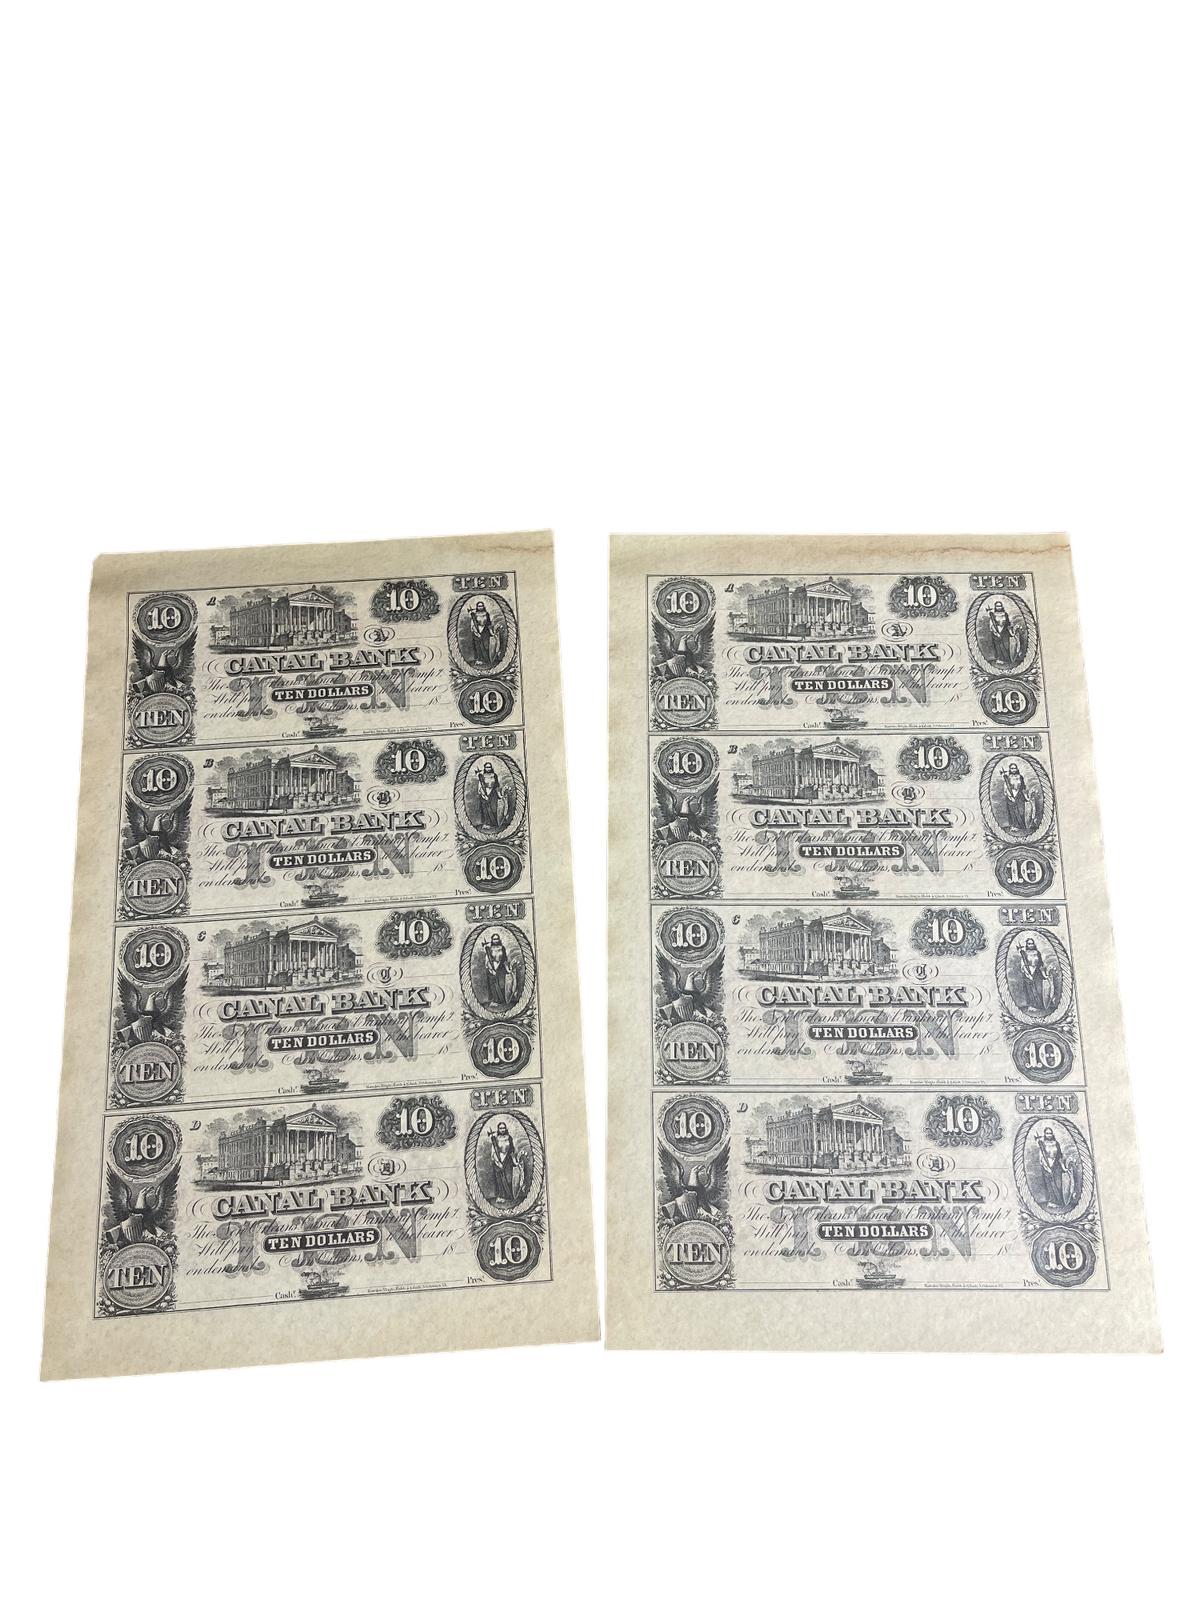 New Orleans Canal Bank $10 Uncut Sheet Paper Money 1860s Collection Lot